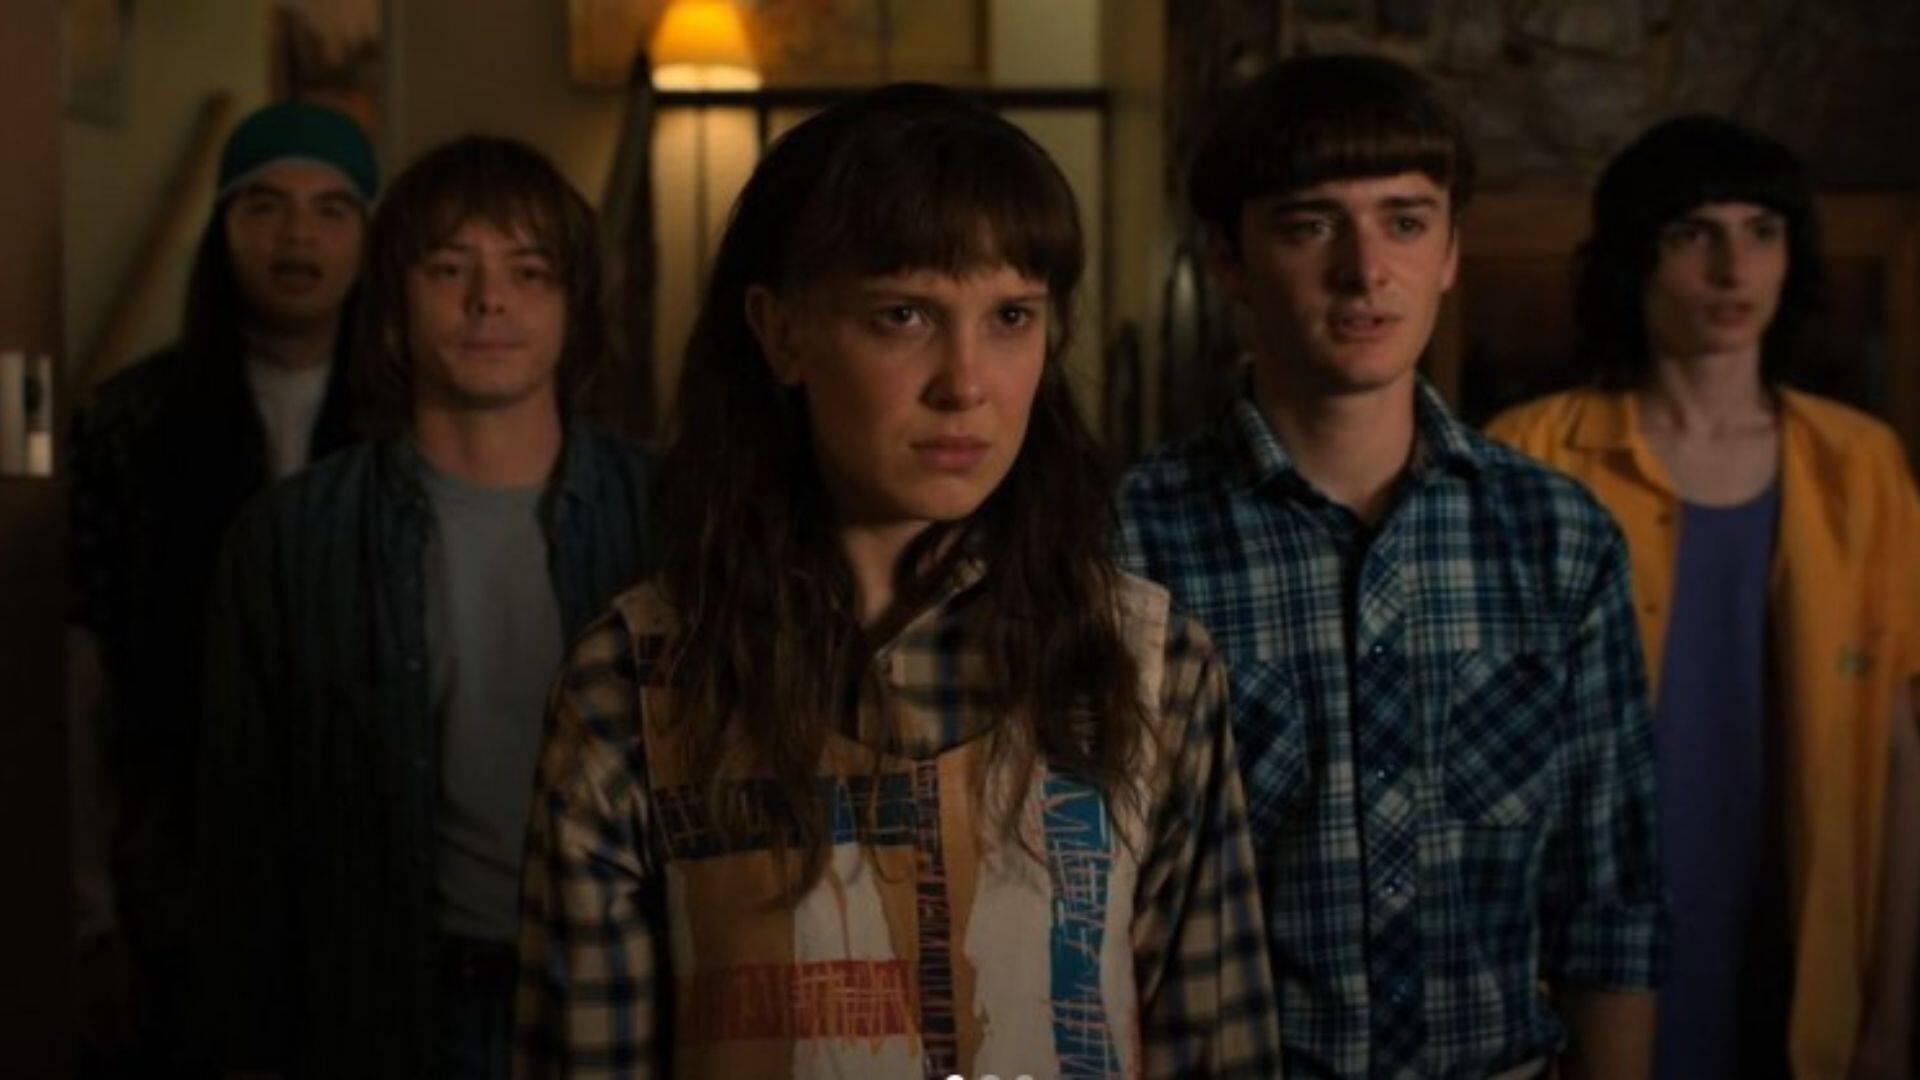 Netflix unveils FIRST look photos from season 4 of 'Stranger Things' – See PICS!